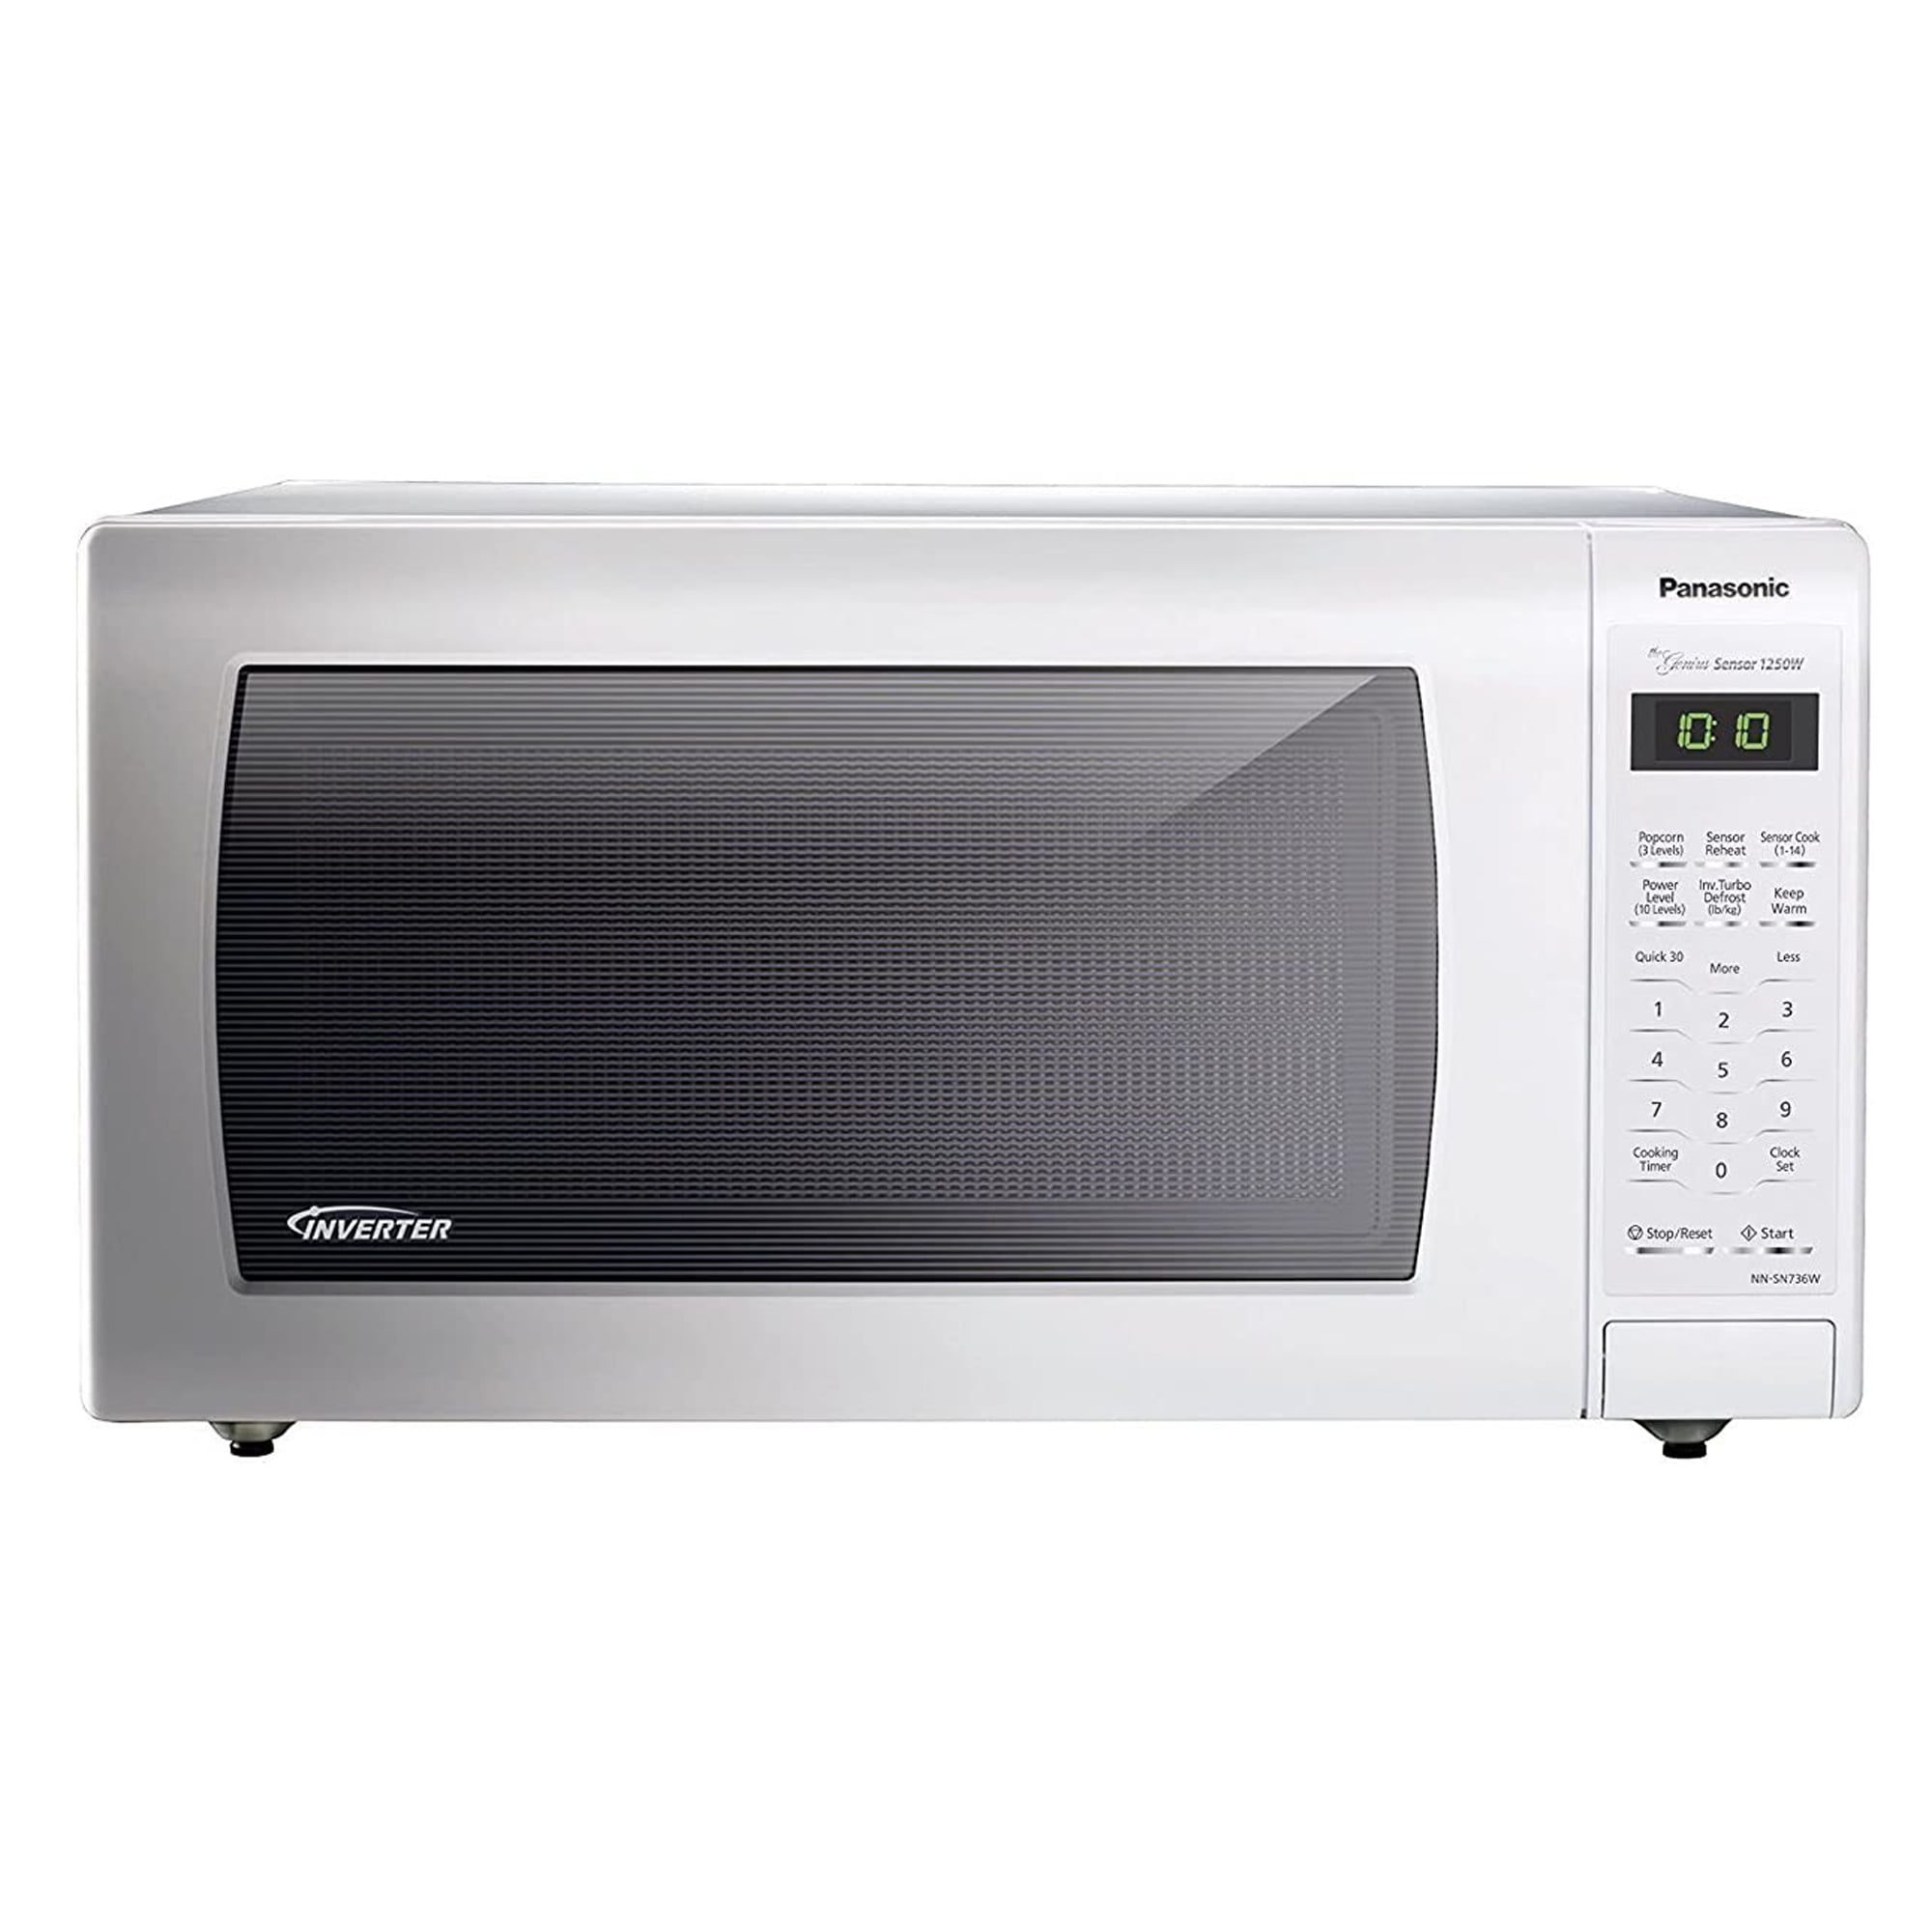 Panasonic NN-SD772S Stainless Steel 1.6-cubic foot Microwave Kitchen Appliance 